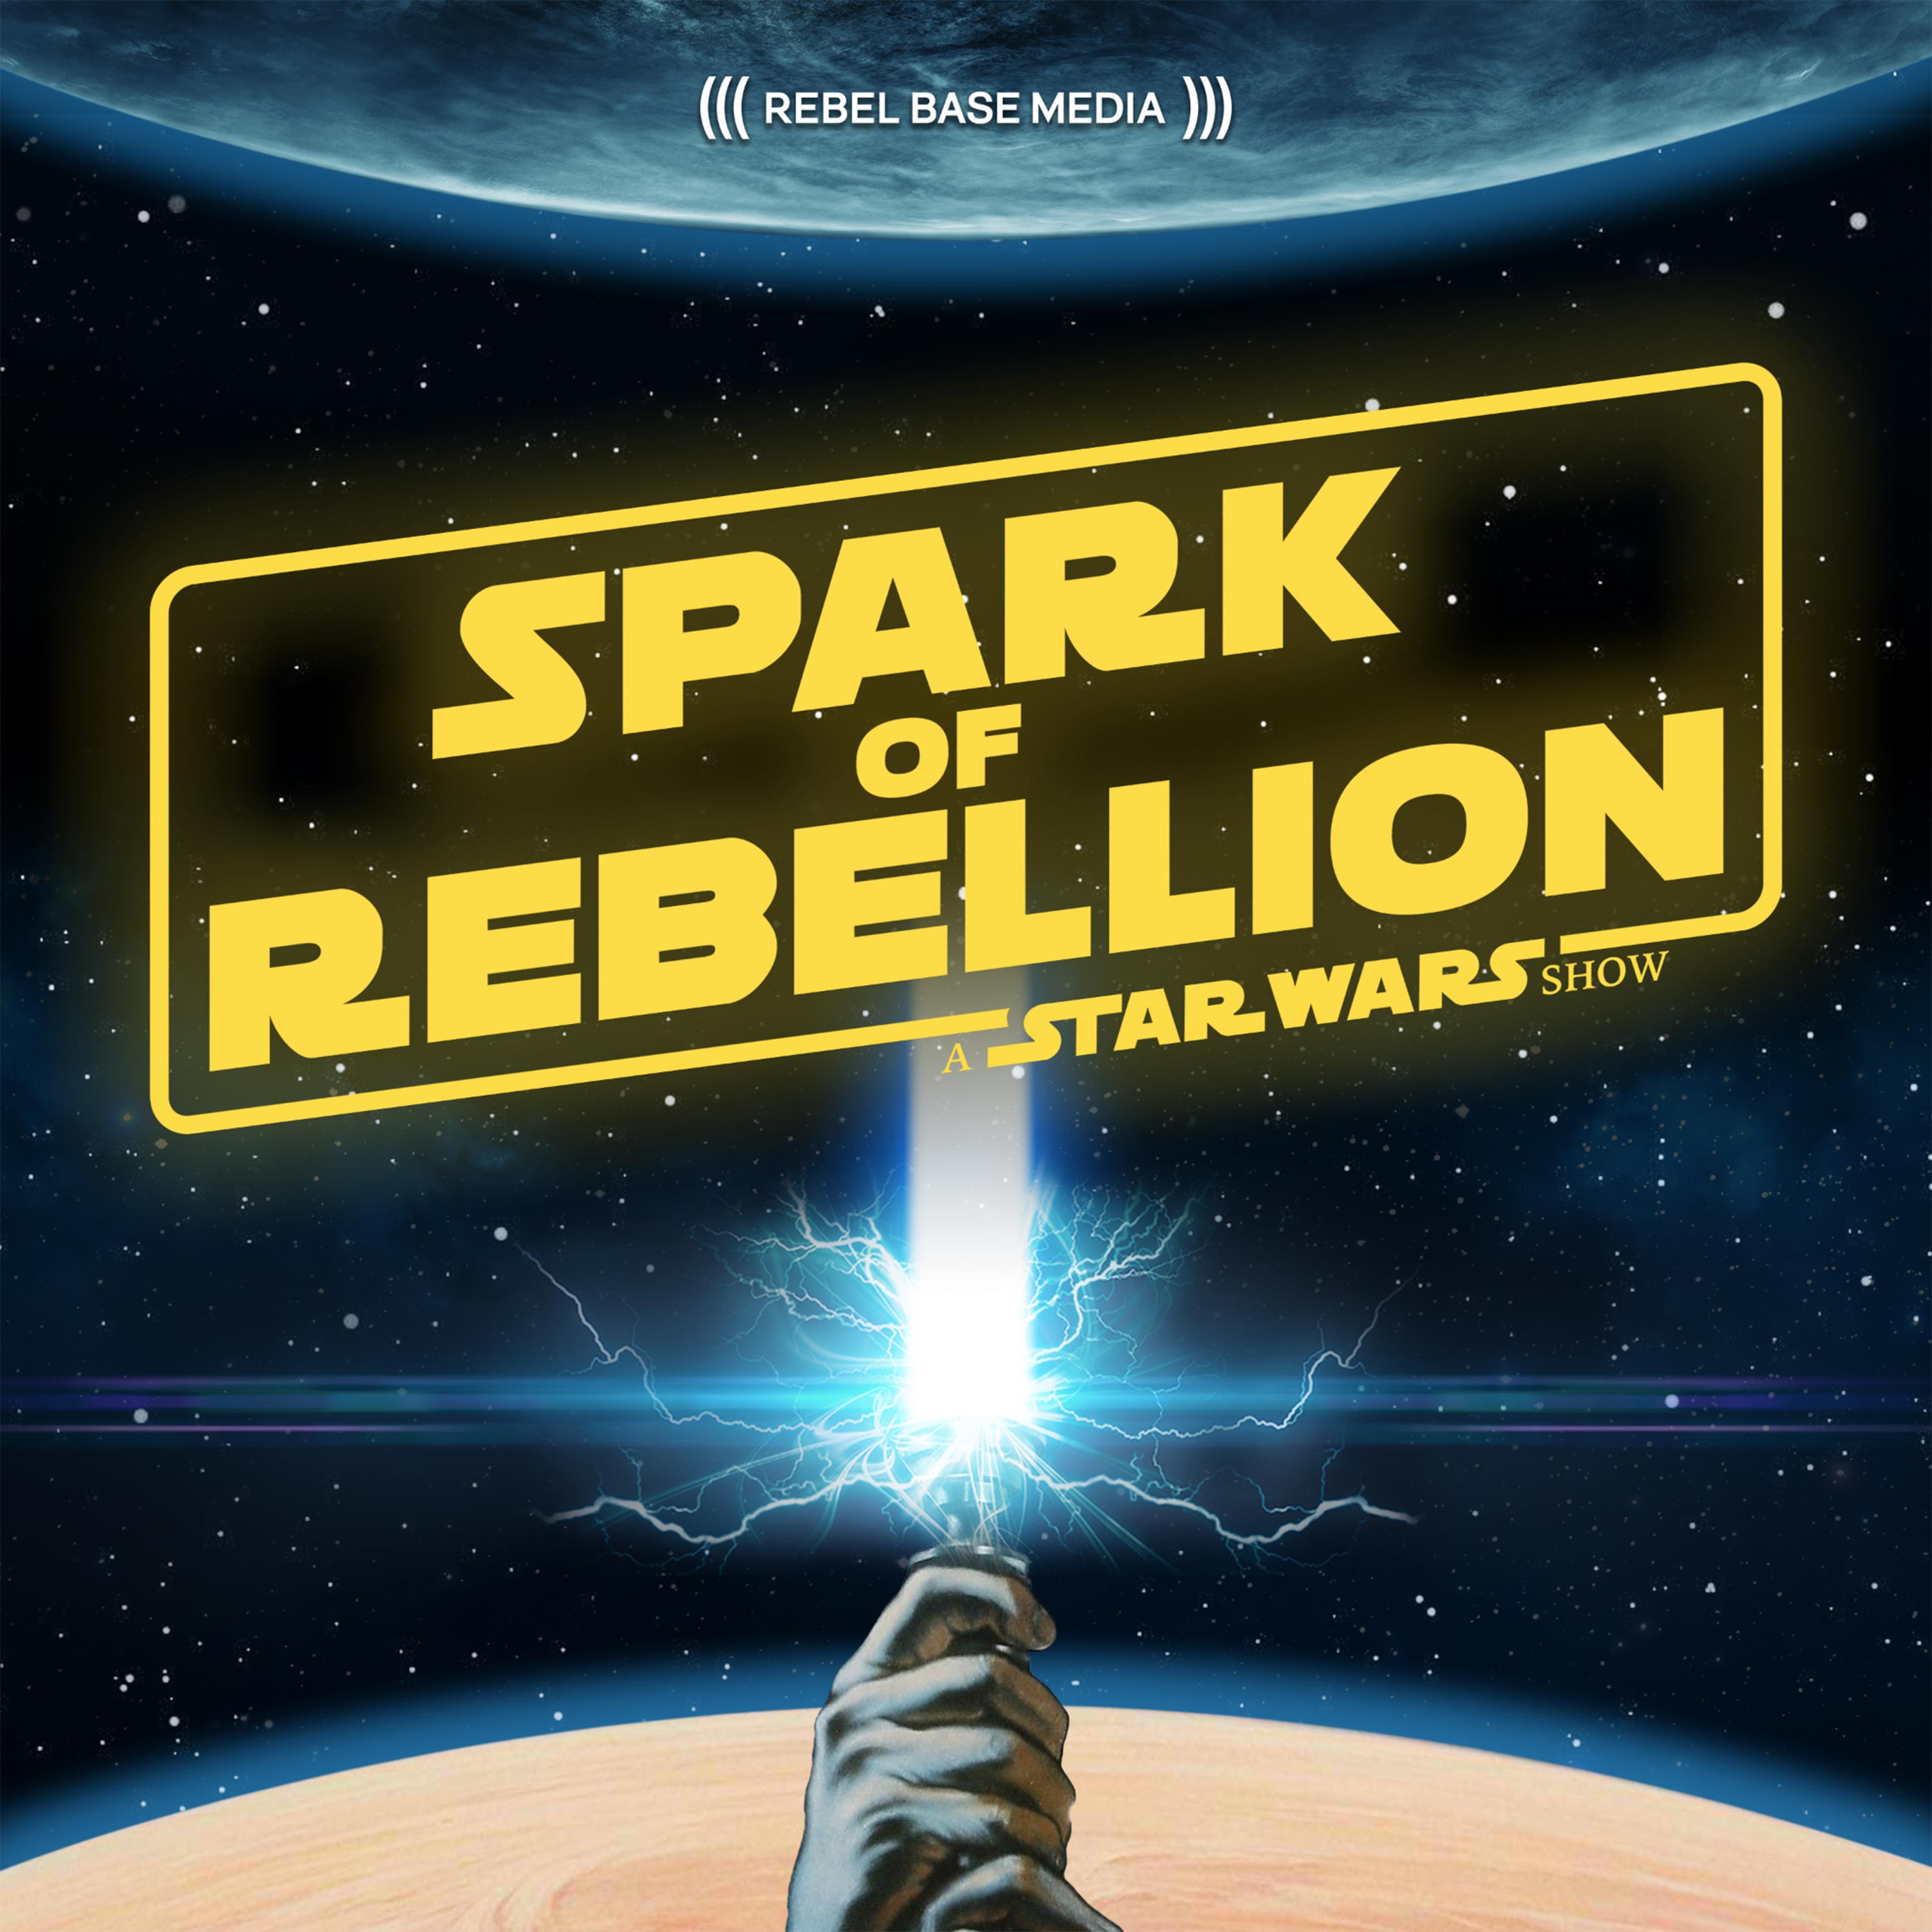 Show artwork for Spark of Rebellion, A Star Wars Show